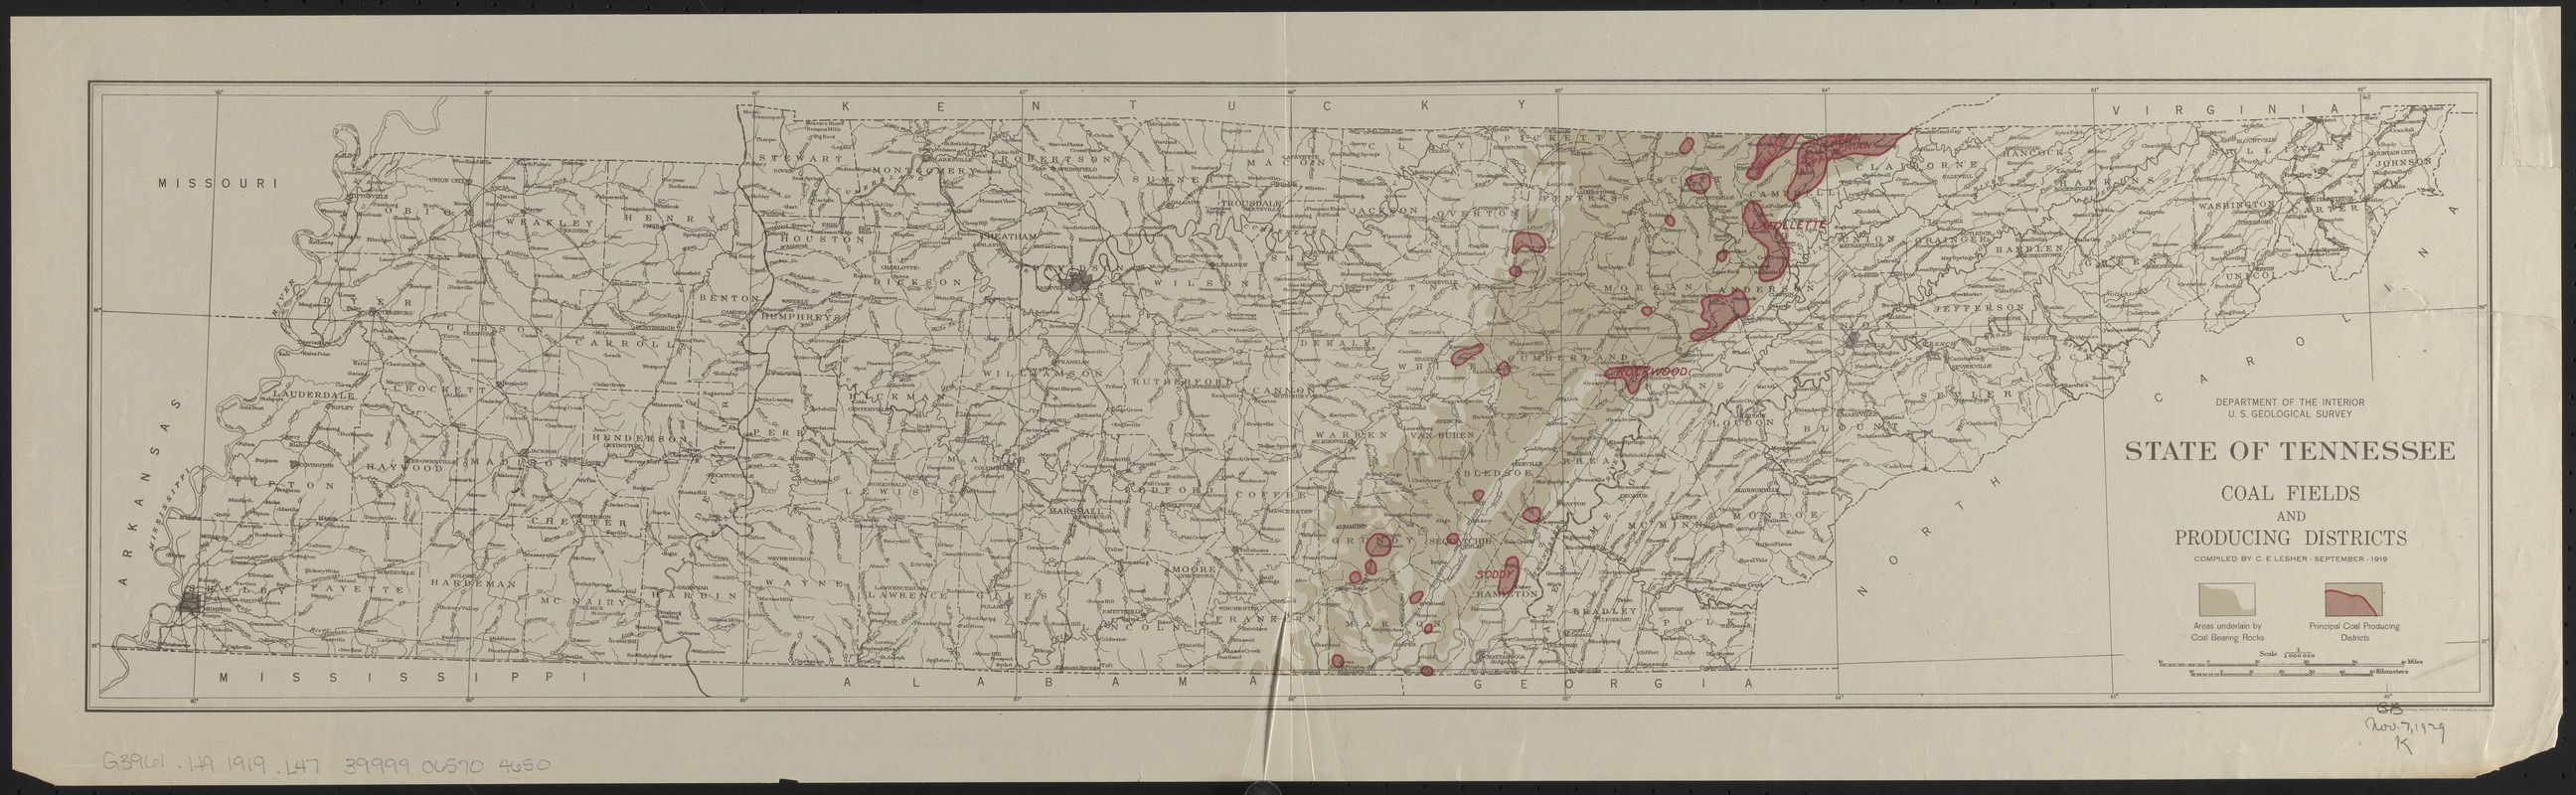 State of Tennessee coal fields and producing districts